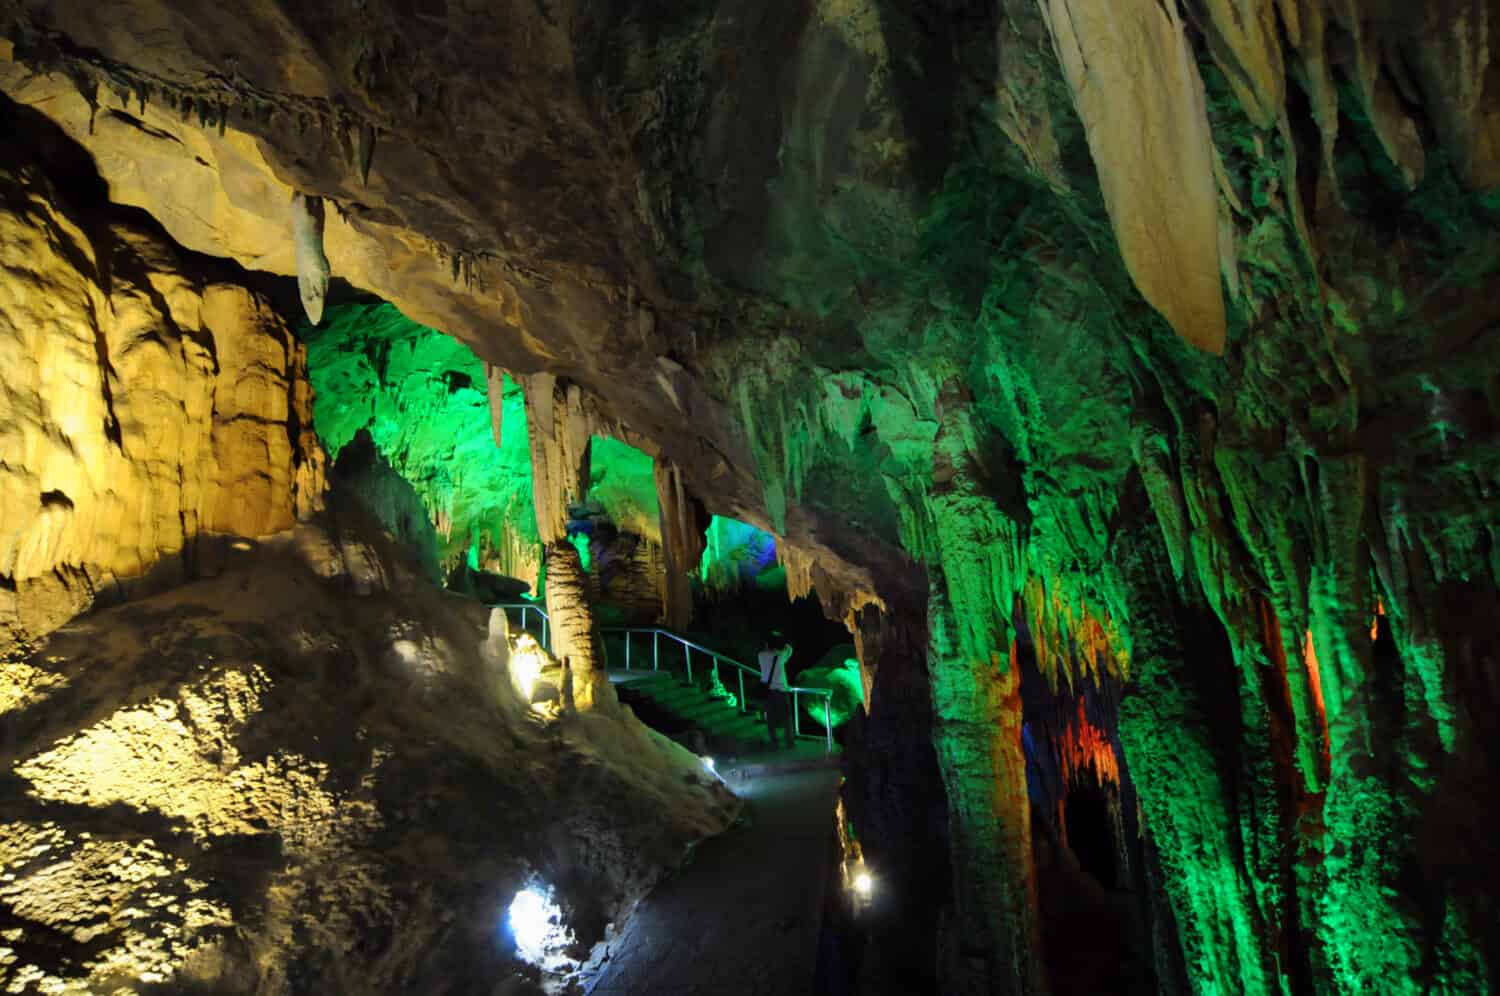 Furong Cave of Wulong in Karst National Geology Park, Chongqing of China, is one of the largest limestone cave in the World, with lots of colorful stalagmites and stalactites